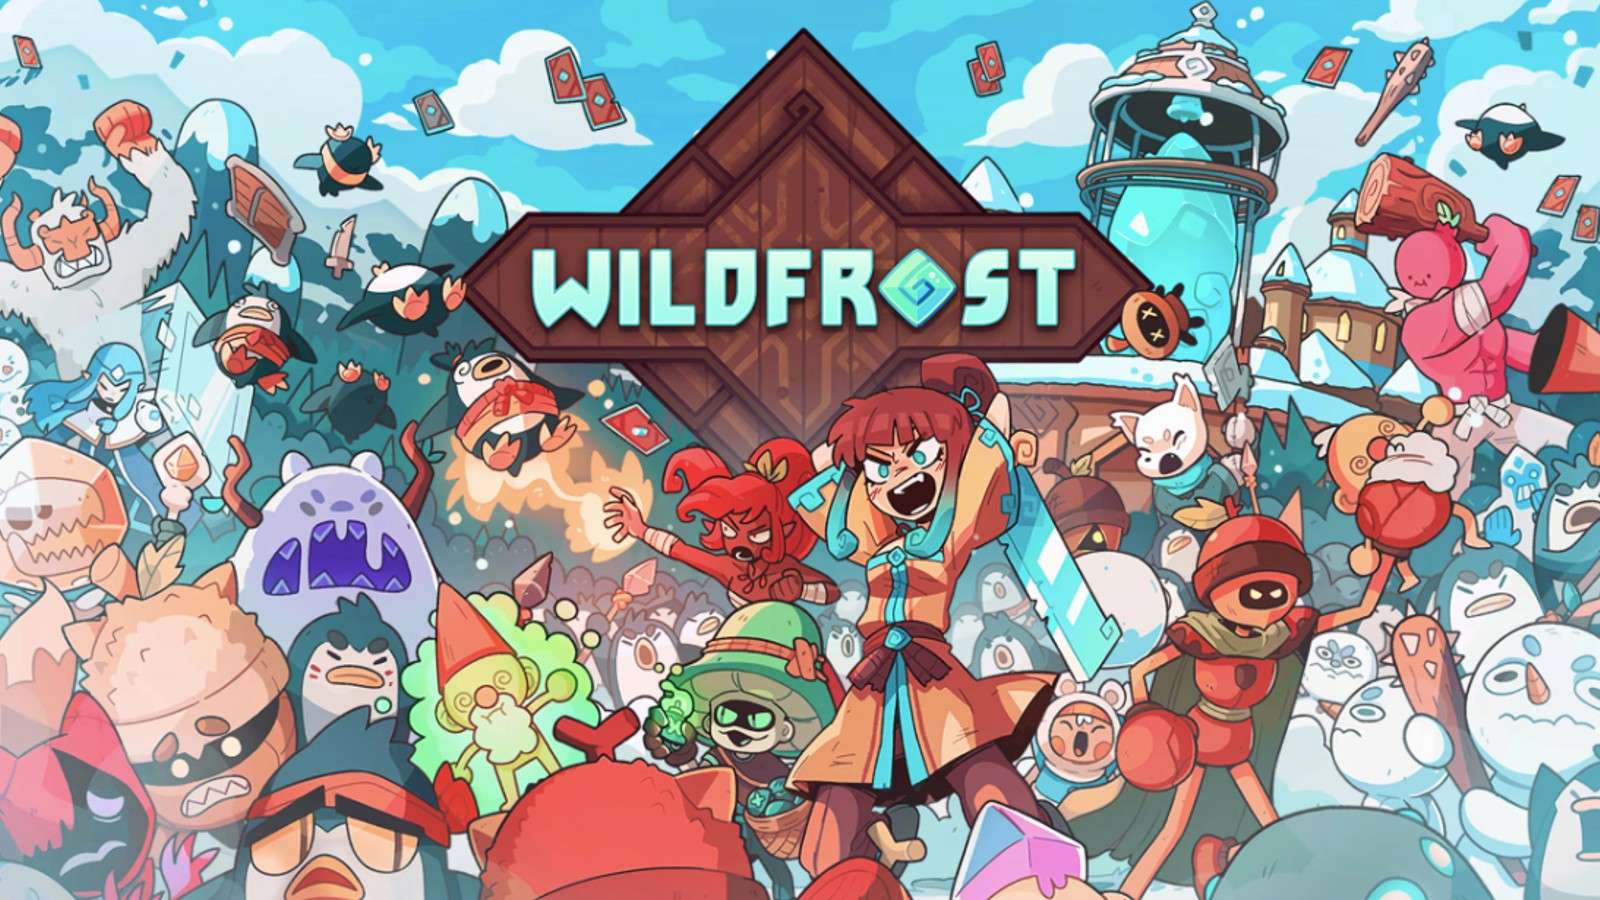 An image of Wildfrost artwork.